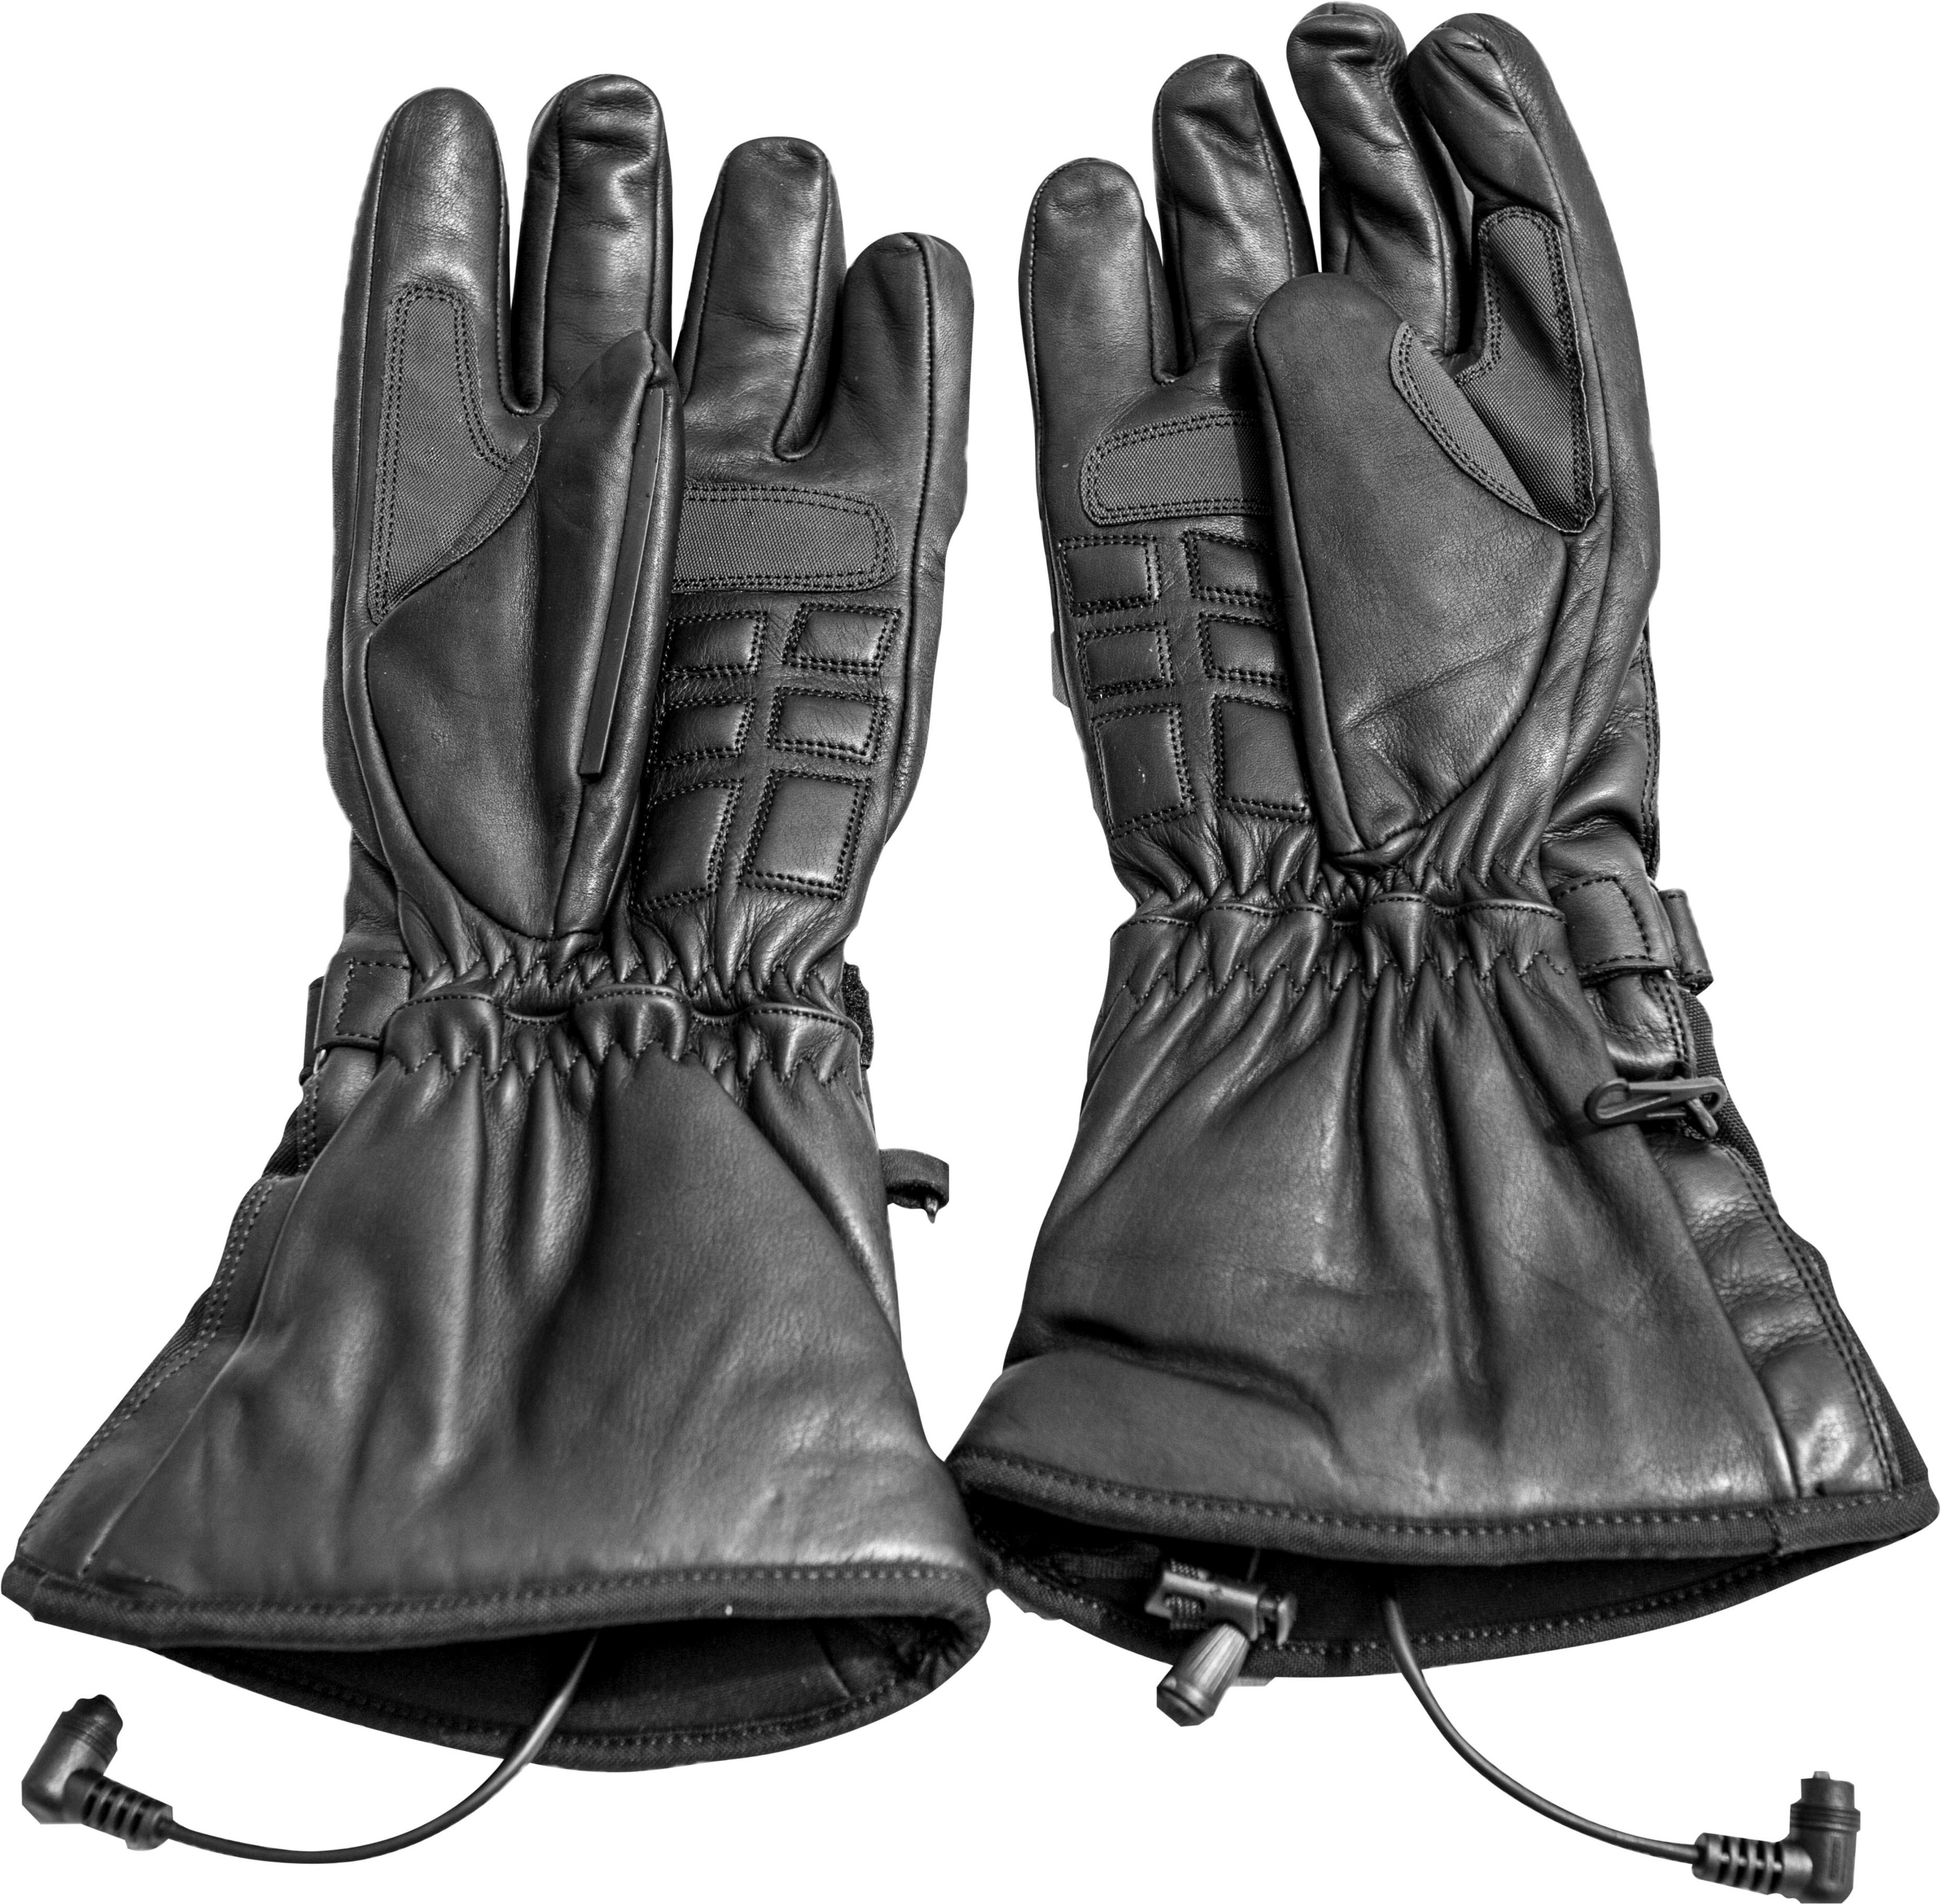 12V Heated Gauntlet Gloves Black X-Small - Click Image to Close